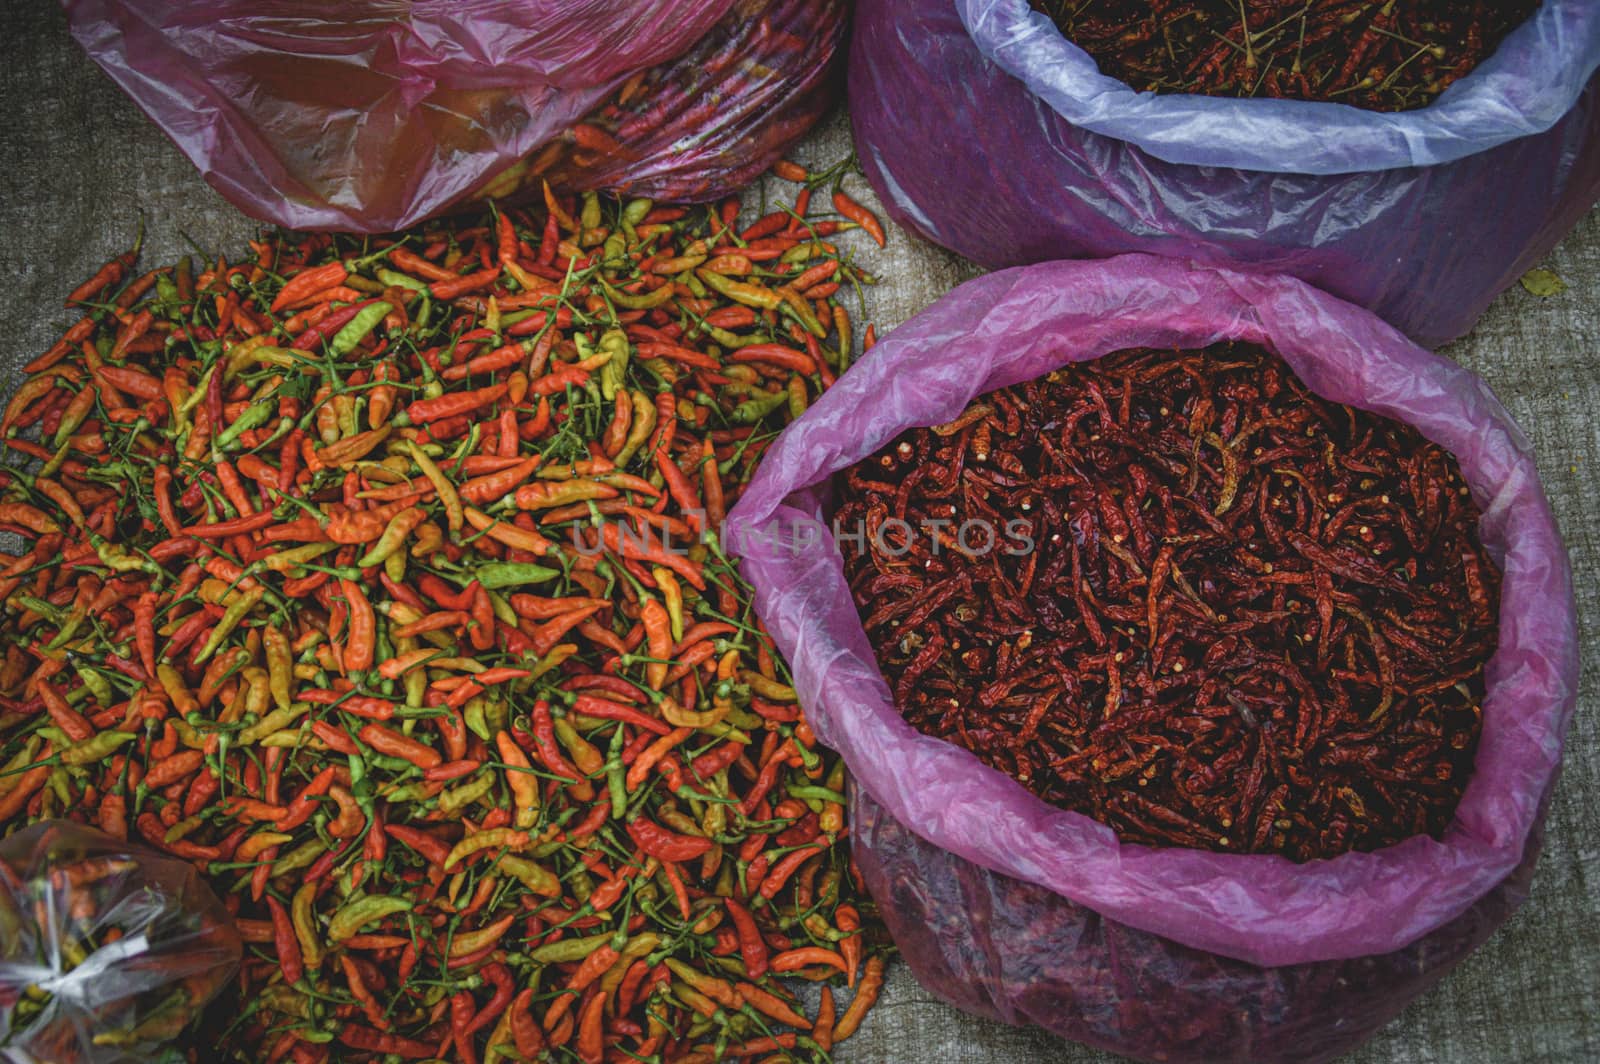 Freshly harvested red chillies sold in Luang Prabang Morning Market in Laos that shows the life, culture and livelihood of the local people